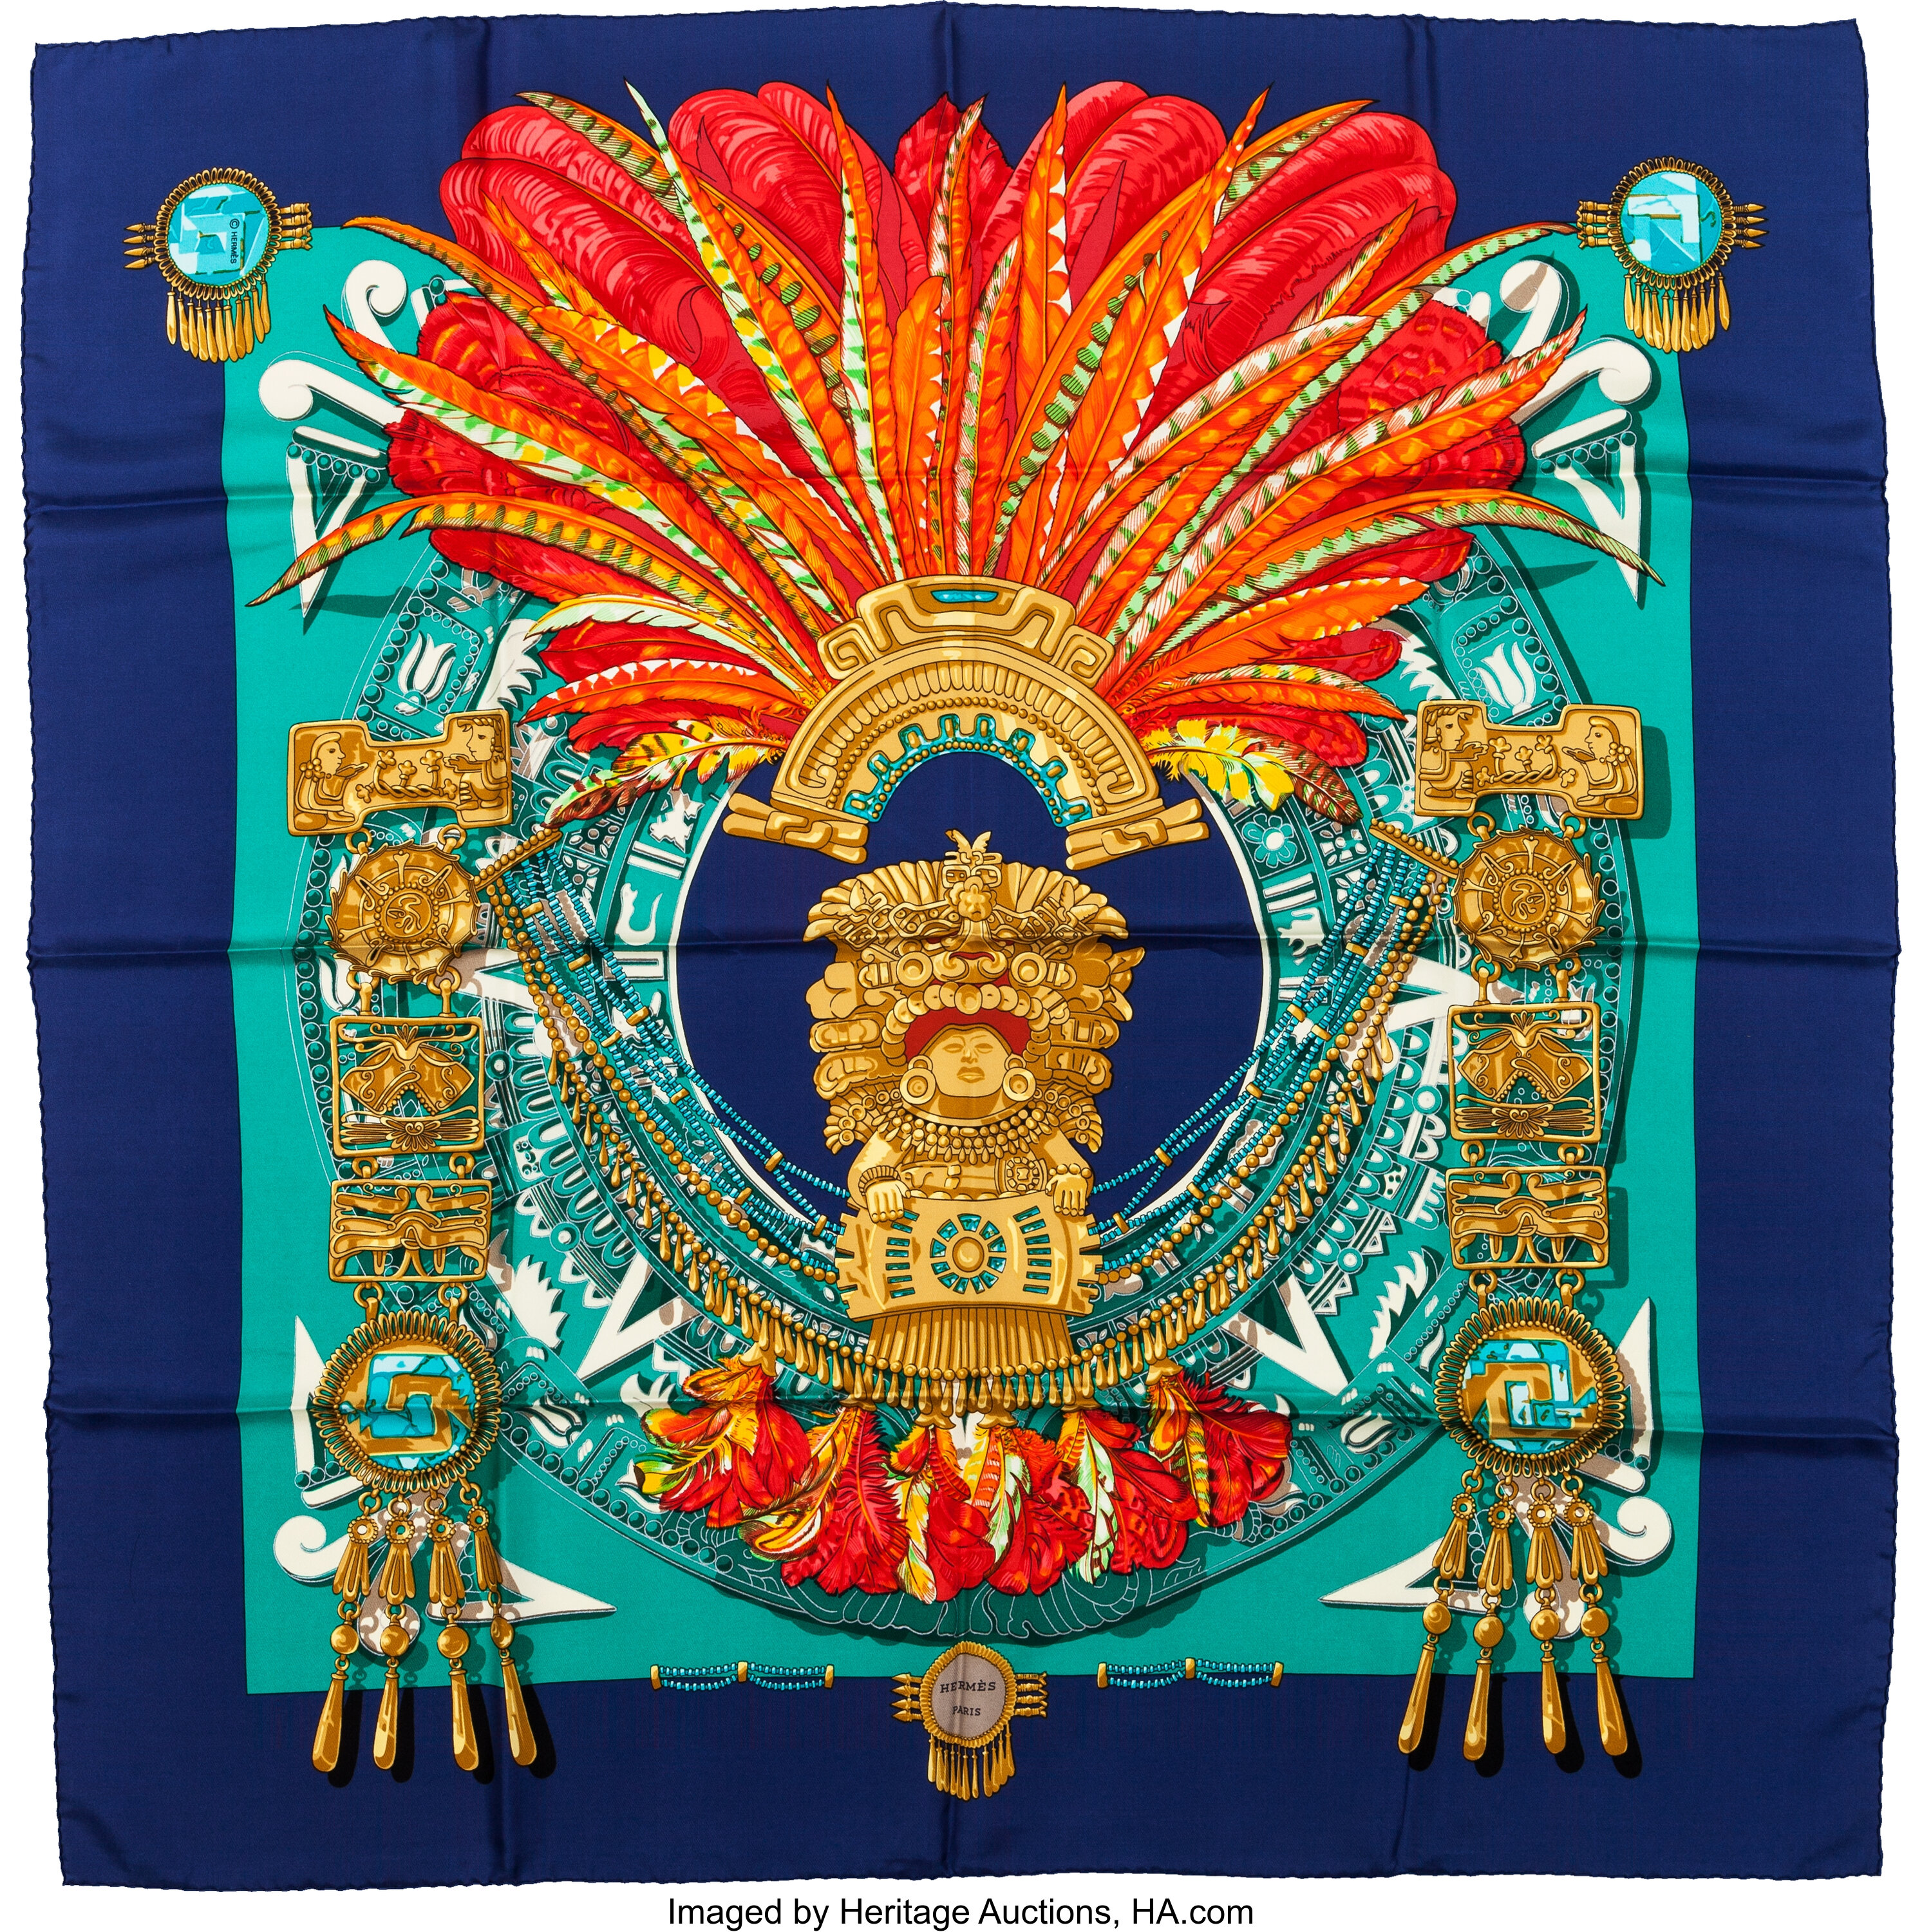 Caty Latham's Mexique carre – The World of Hermes© Scarves